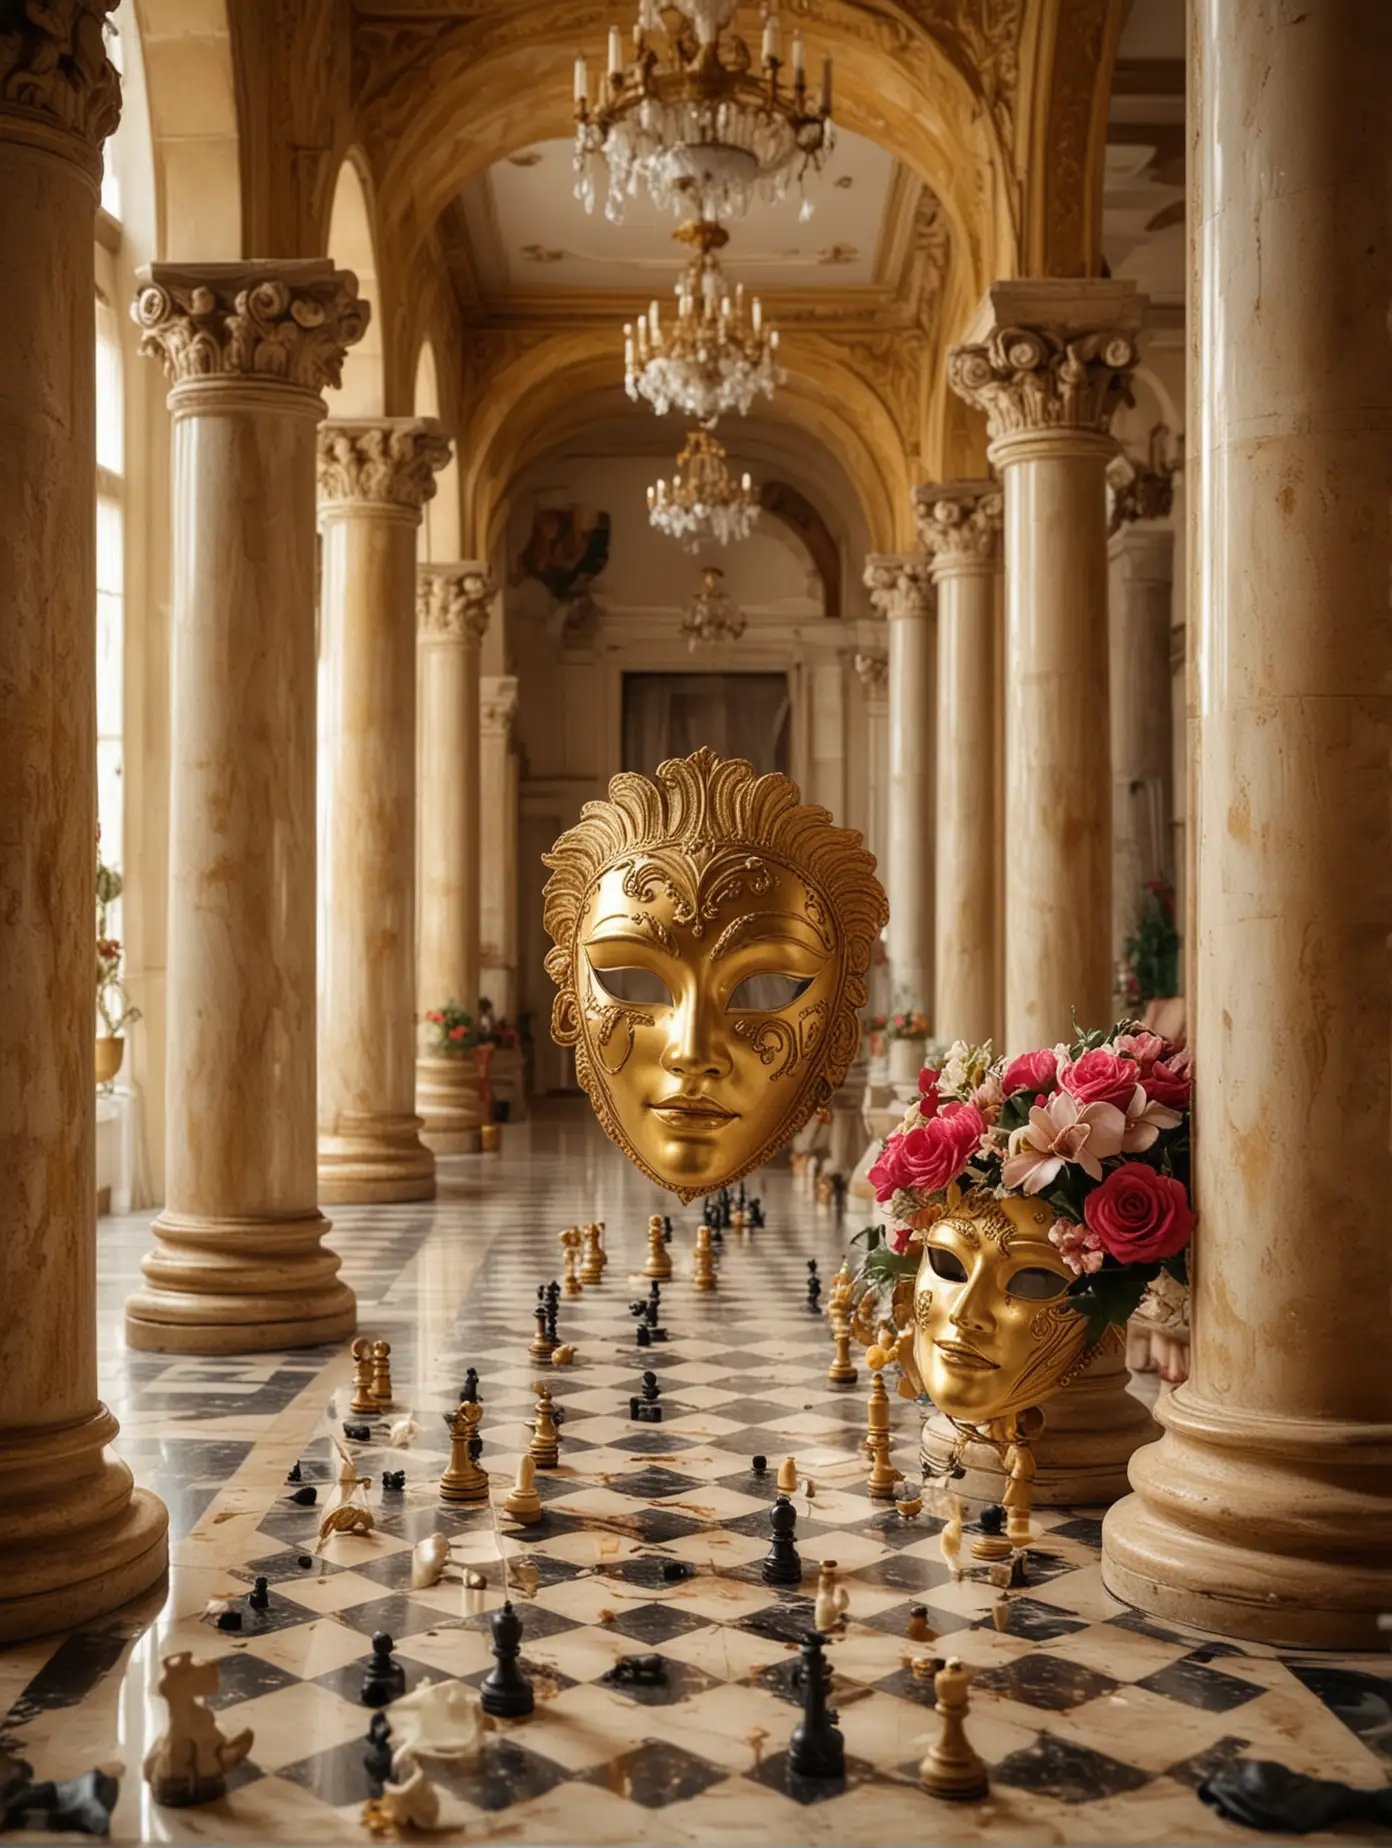 Golden-Carnival-Mask-and-Chess-in-Luxurious-Hall-with-Flower-Decor